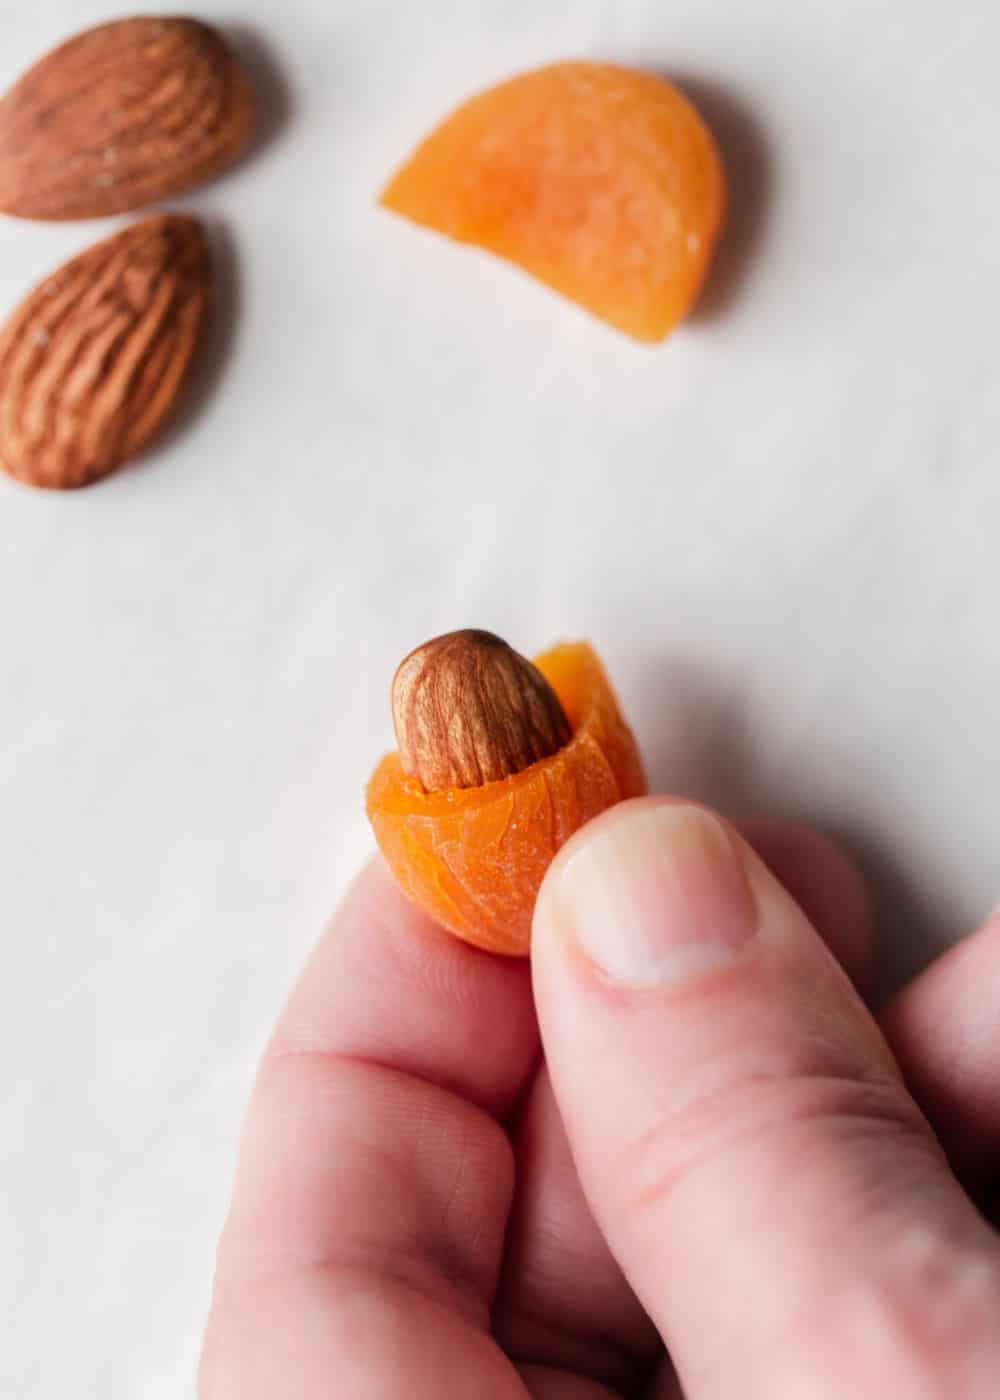 hand holding dried apricot with whole almond inserted into the center.